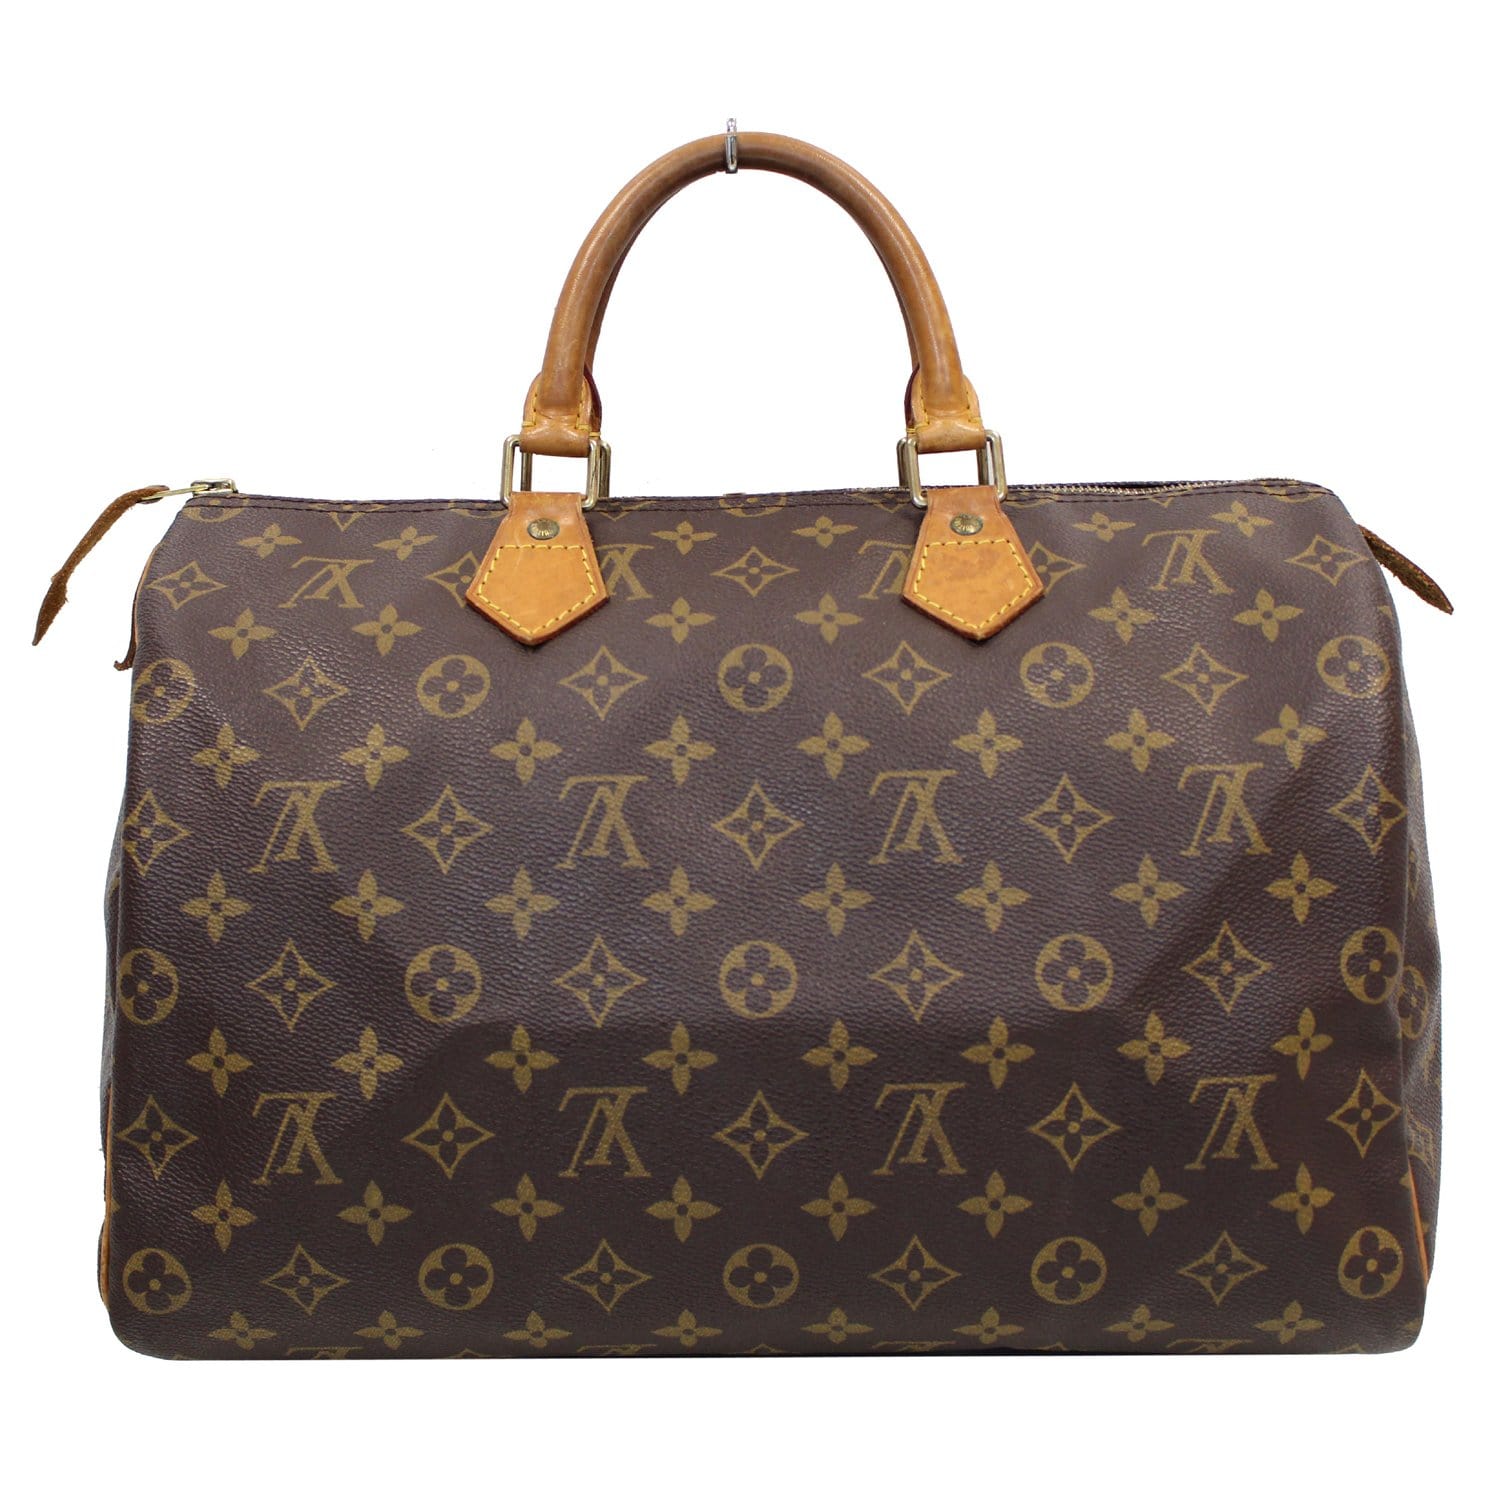 Louis Vuitton 1995 pre-owned Speedy 25 tote bag